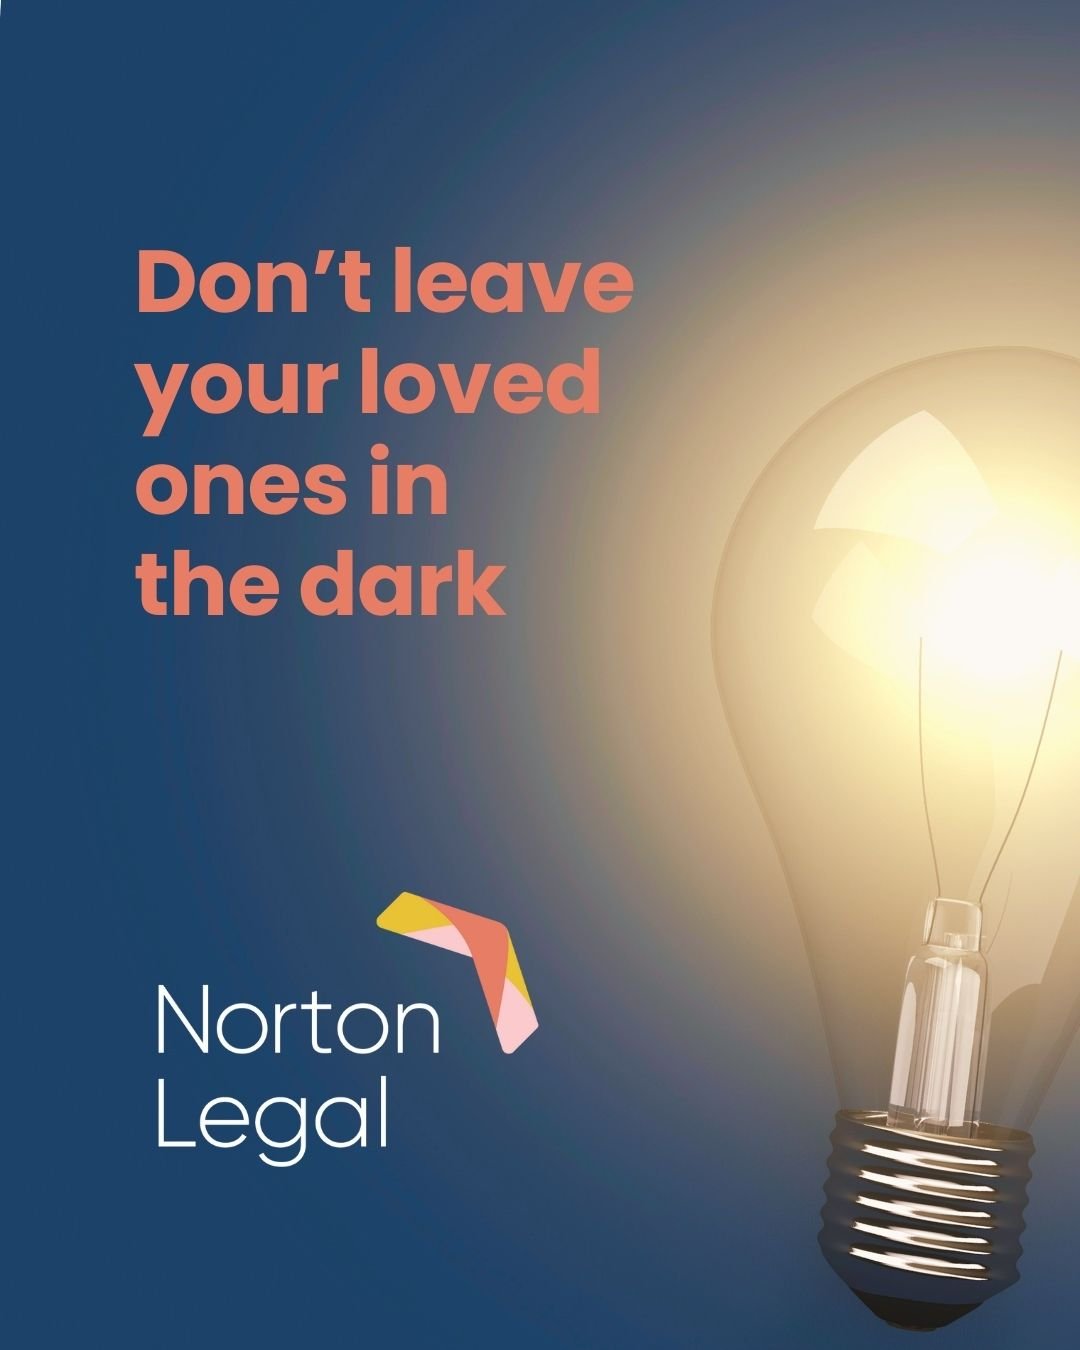 Concerned about leaving your loved ones in the dark? 

Take charge of your legacy with a will that leaves no room for uncertainty. 

✍️ At Norton Legal, we specialise in making sure your wishes are crystal clear and legally sound.

Visit our website 